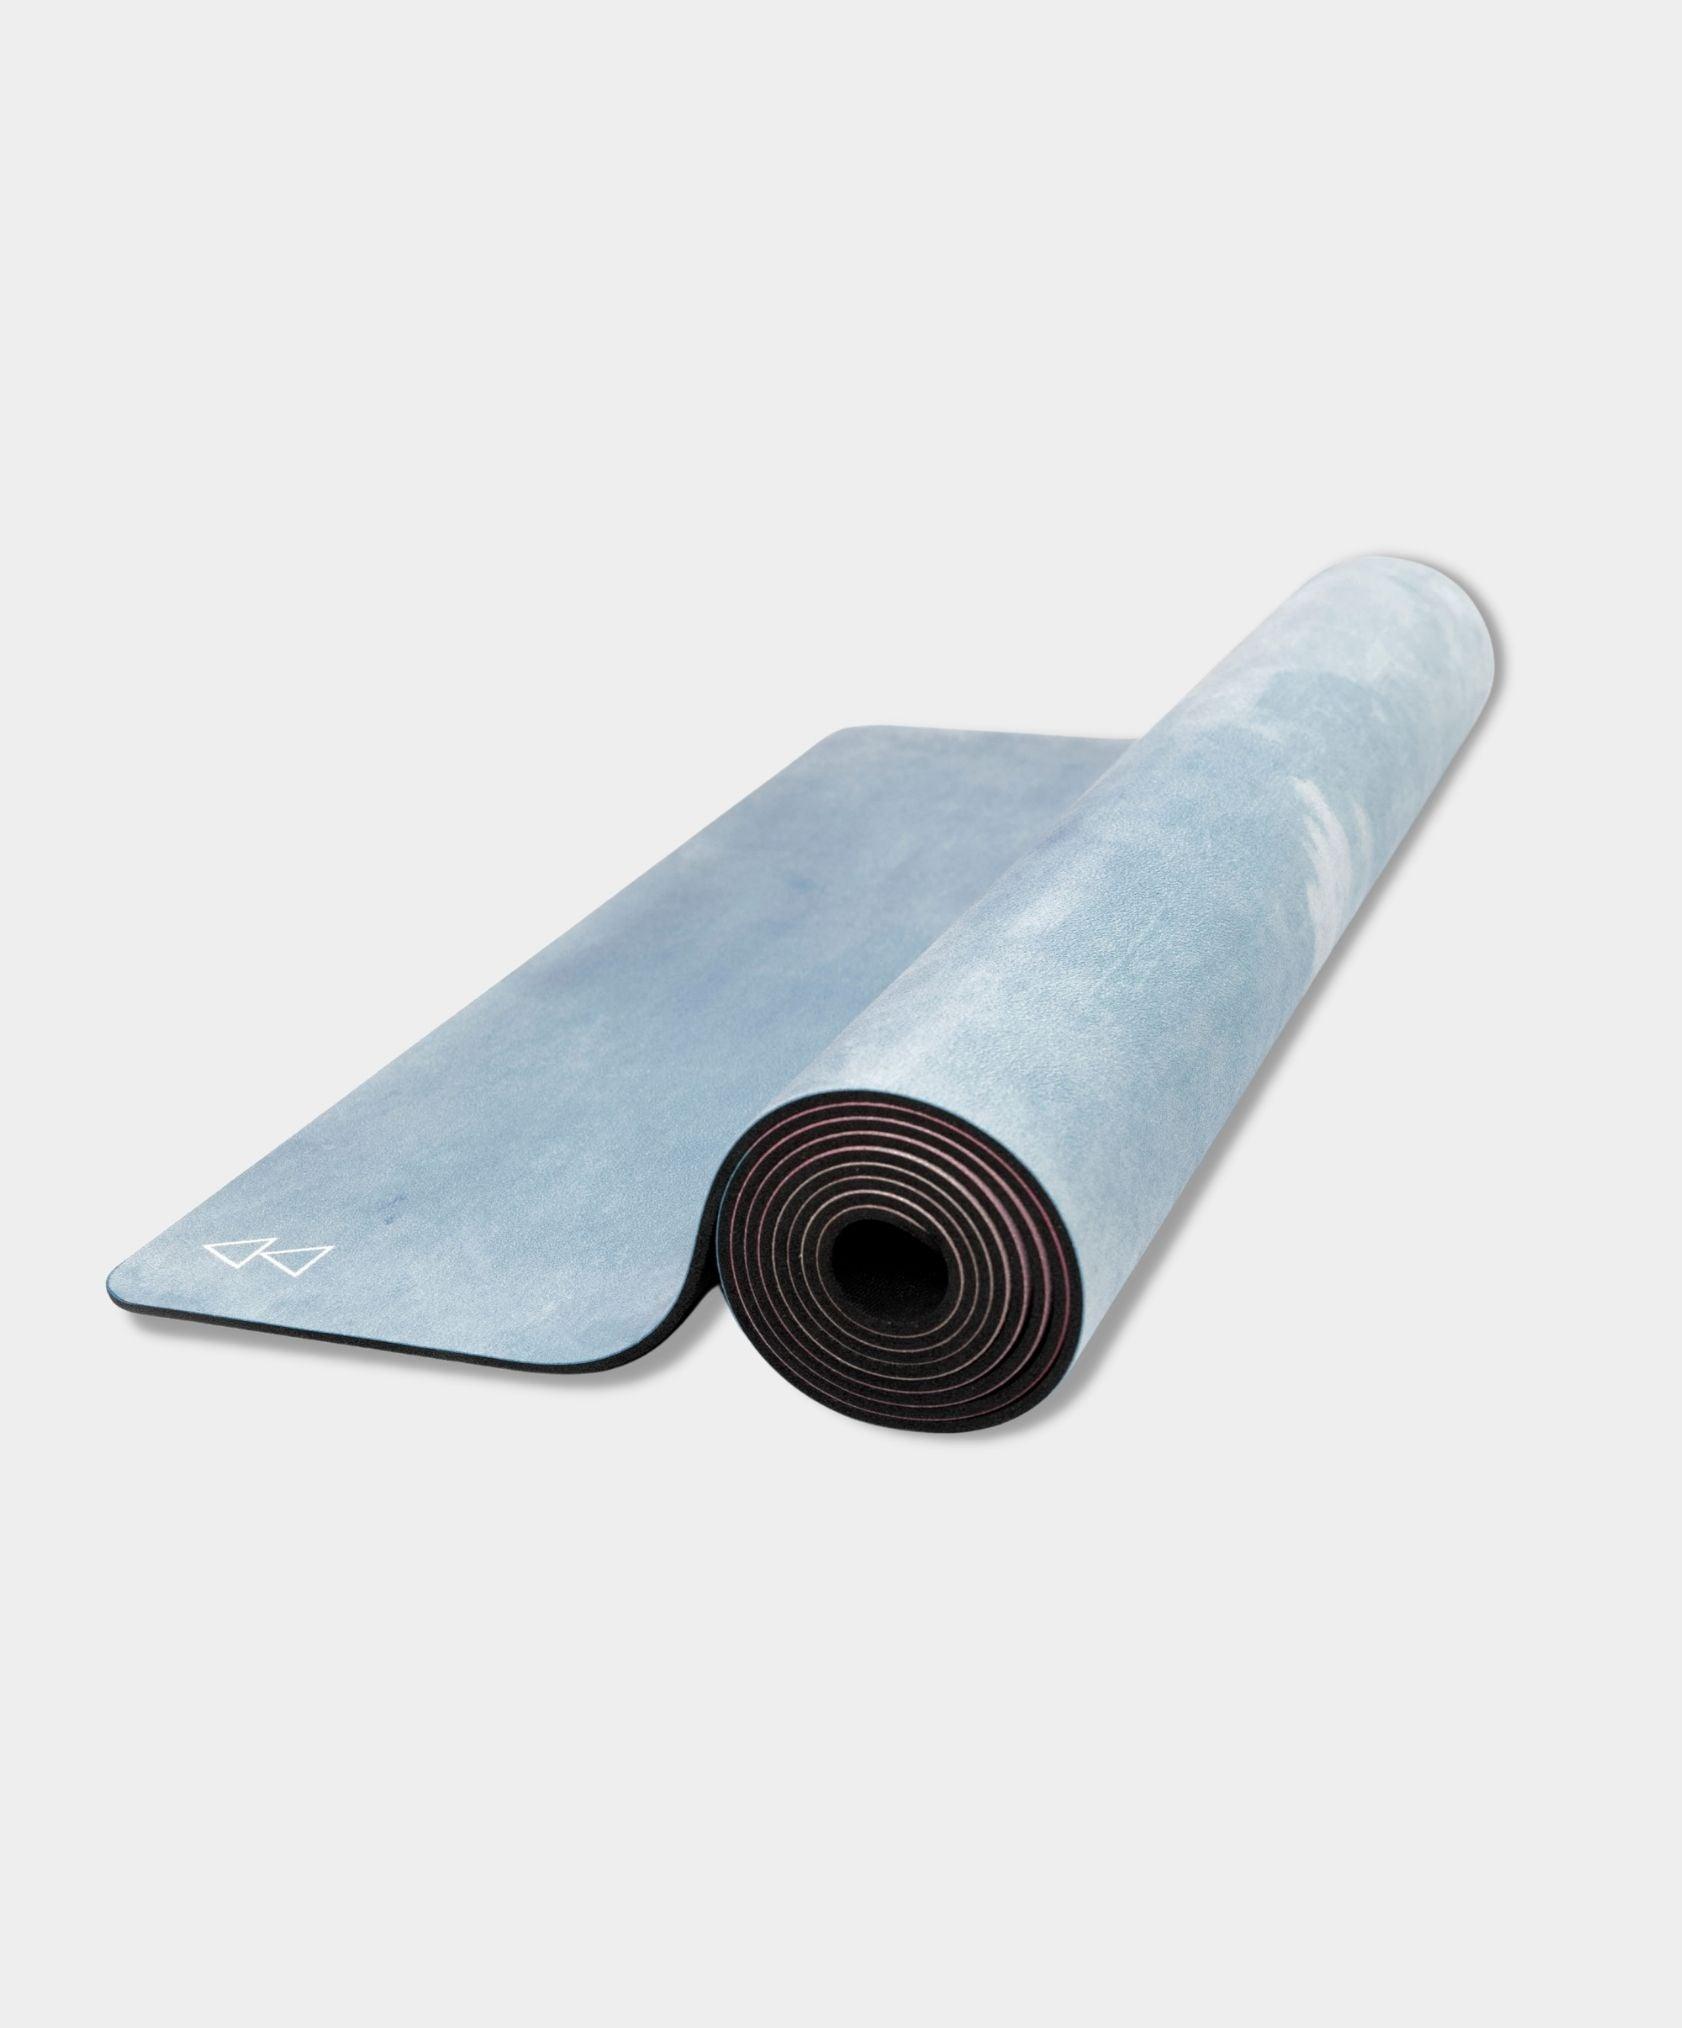 YDL Combo Yoga Mat - 2-in-1 (Mat + Towel) - Best For Hot Practices - Yoga Design Lab 